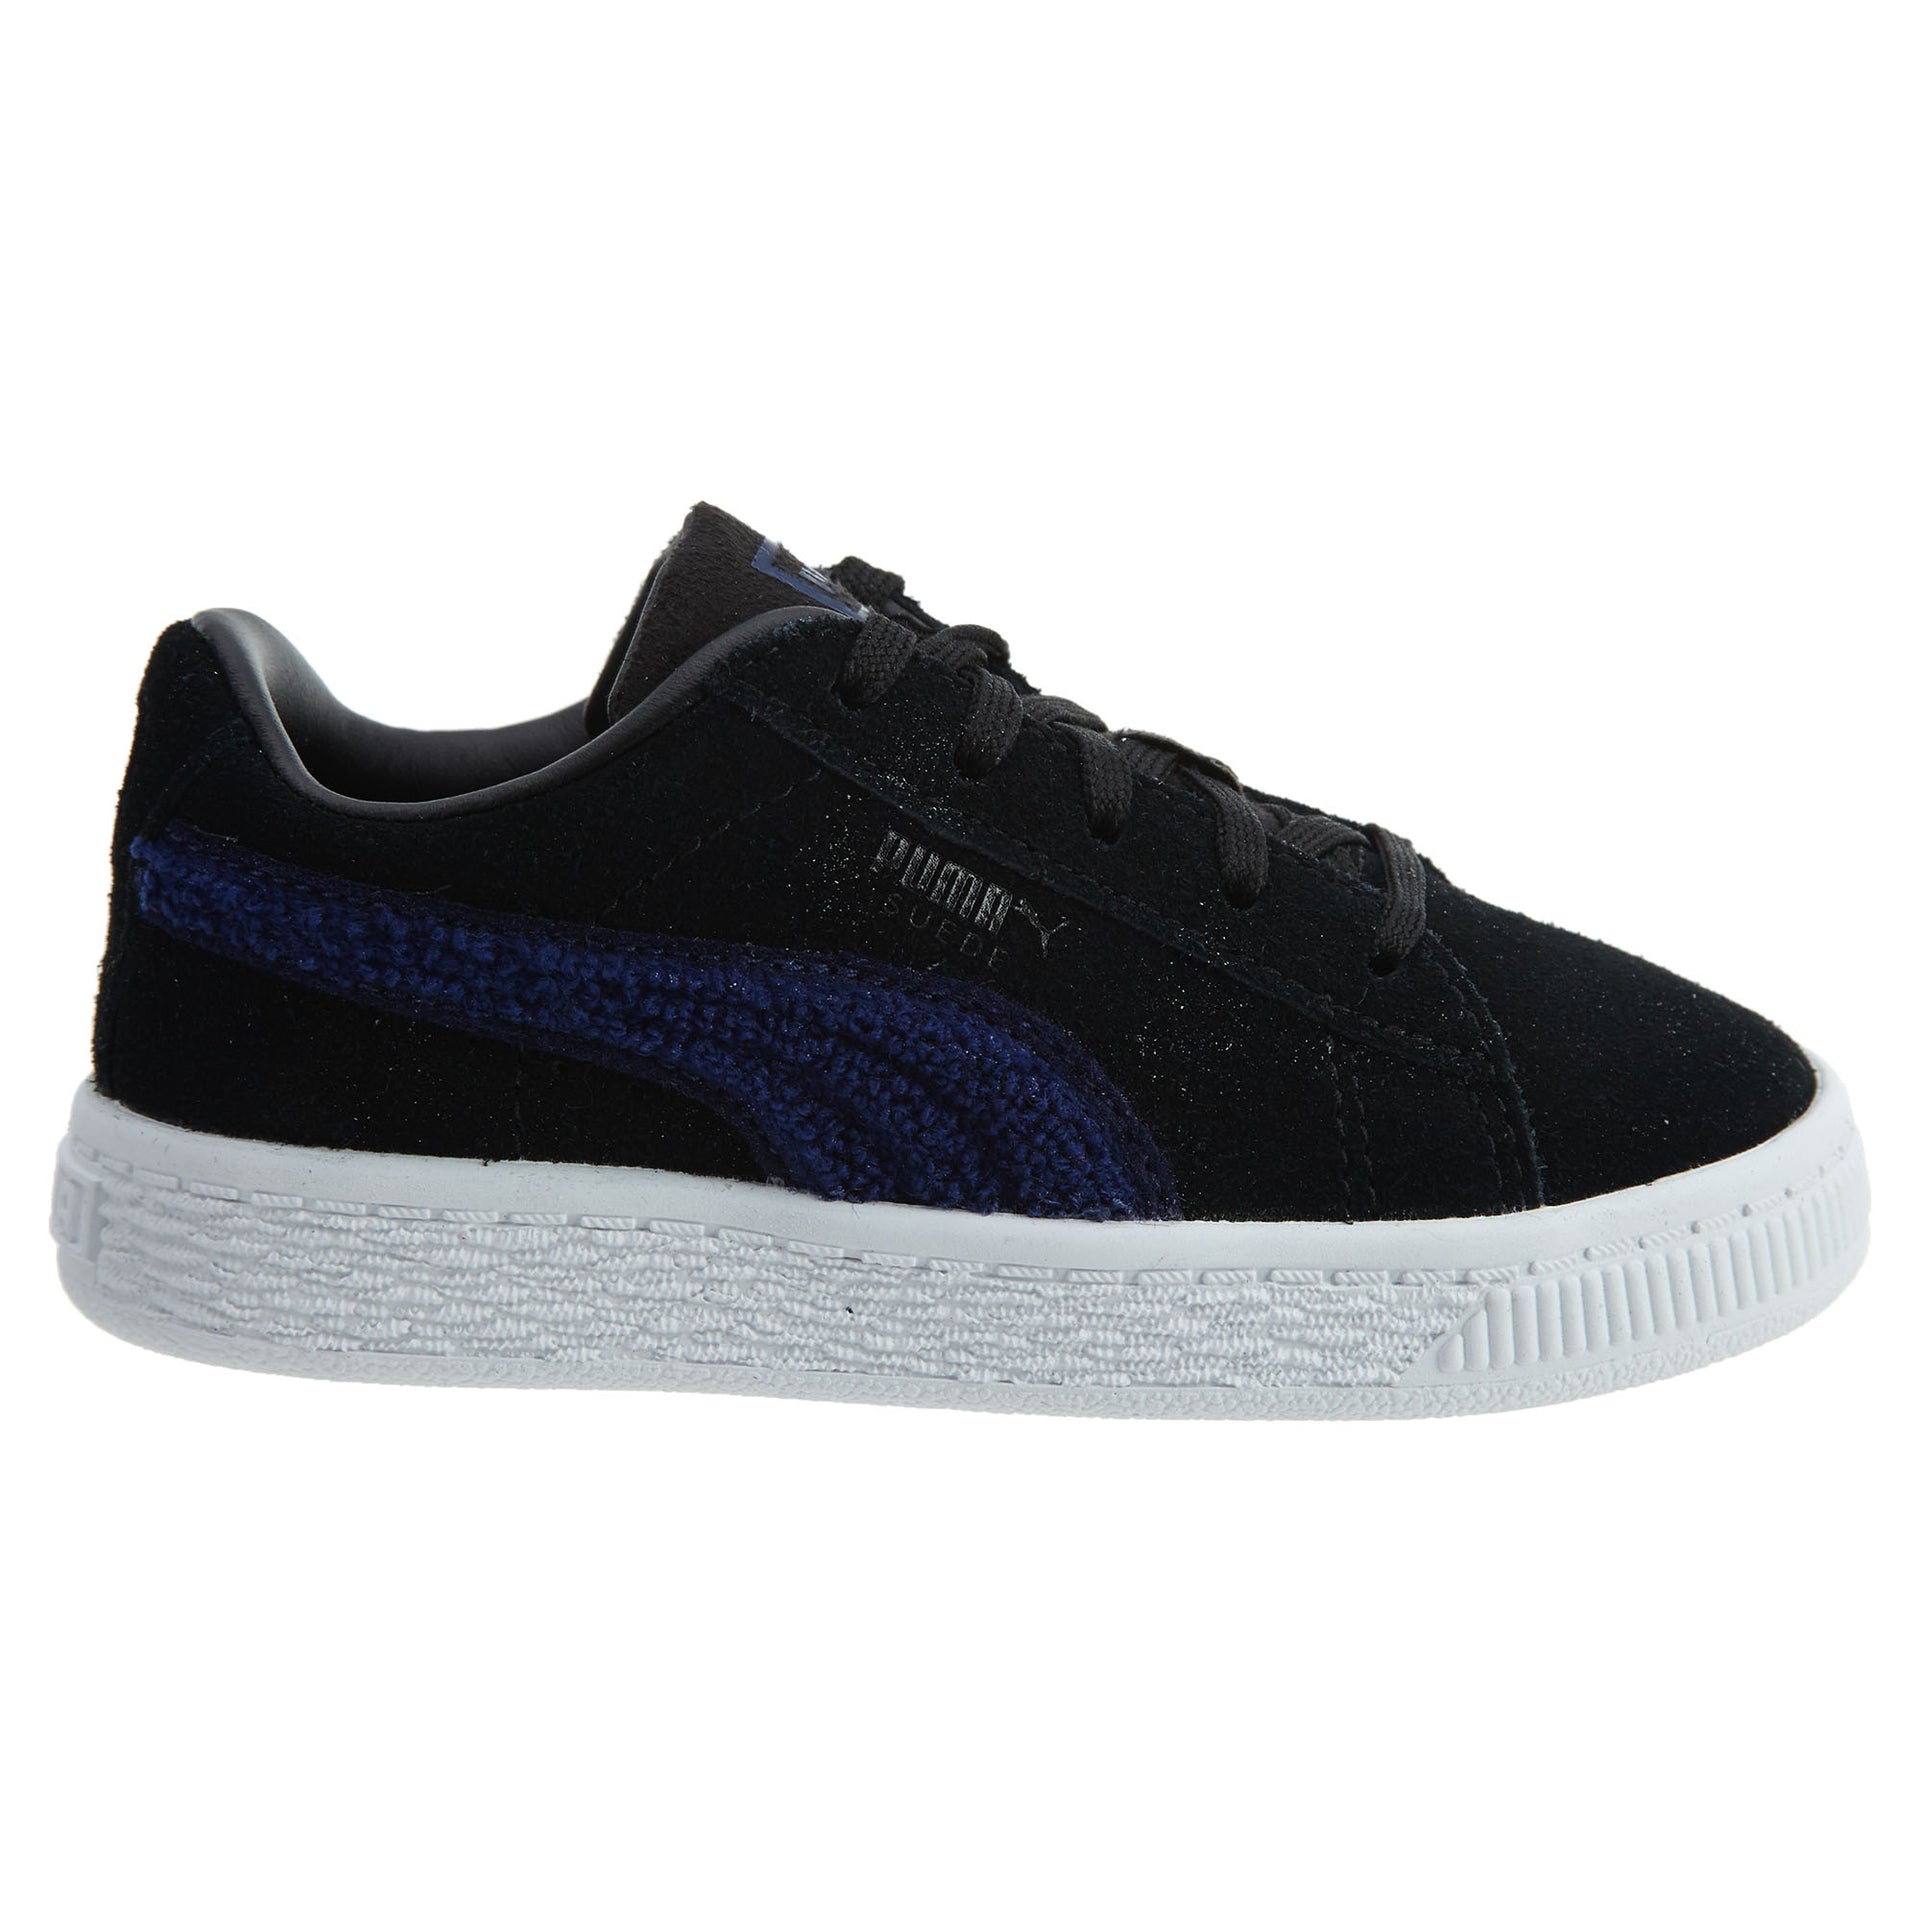 Puma Suede Classic Terry Infant Sneaker Toddlers Style : 363909